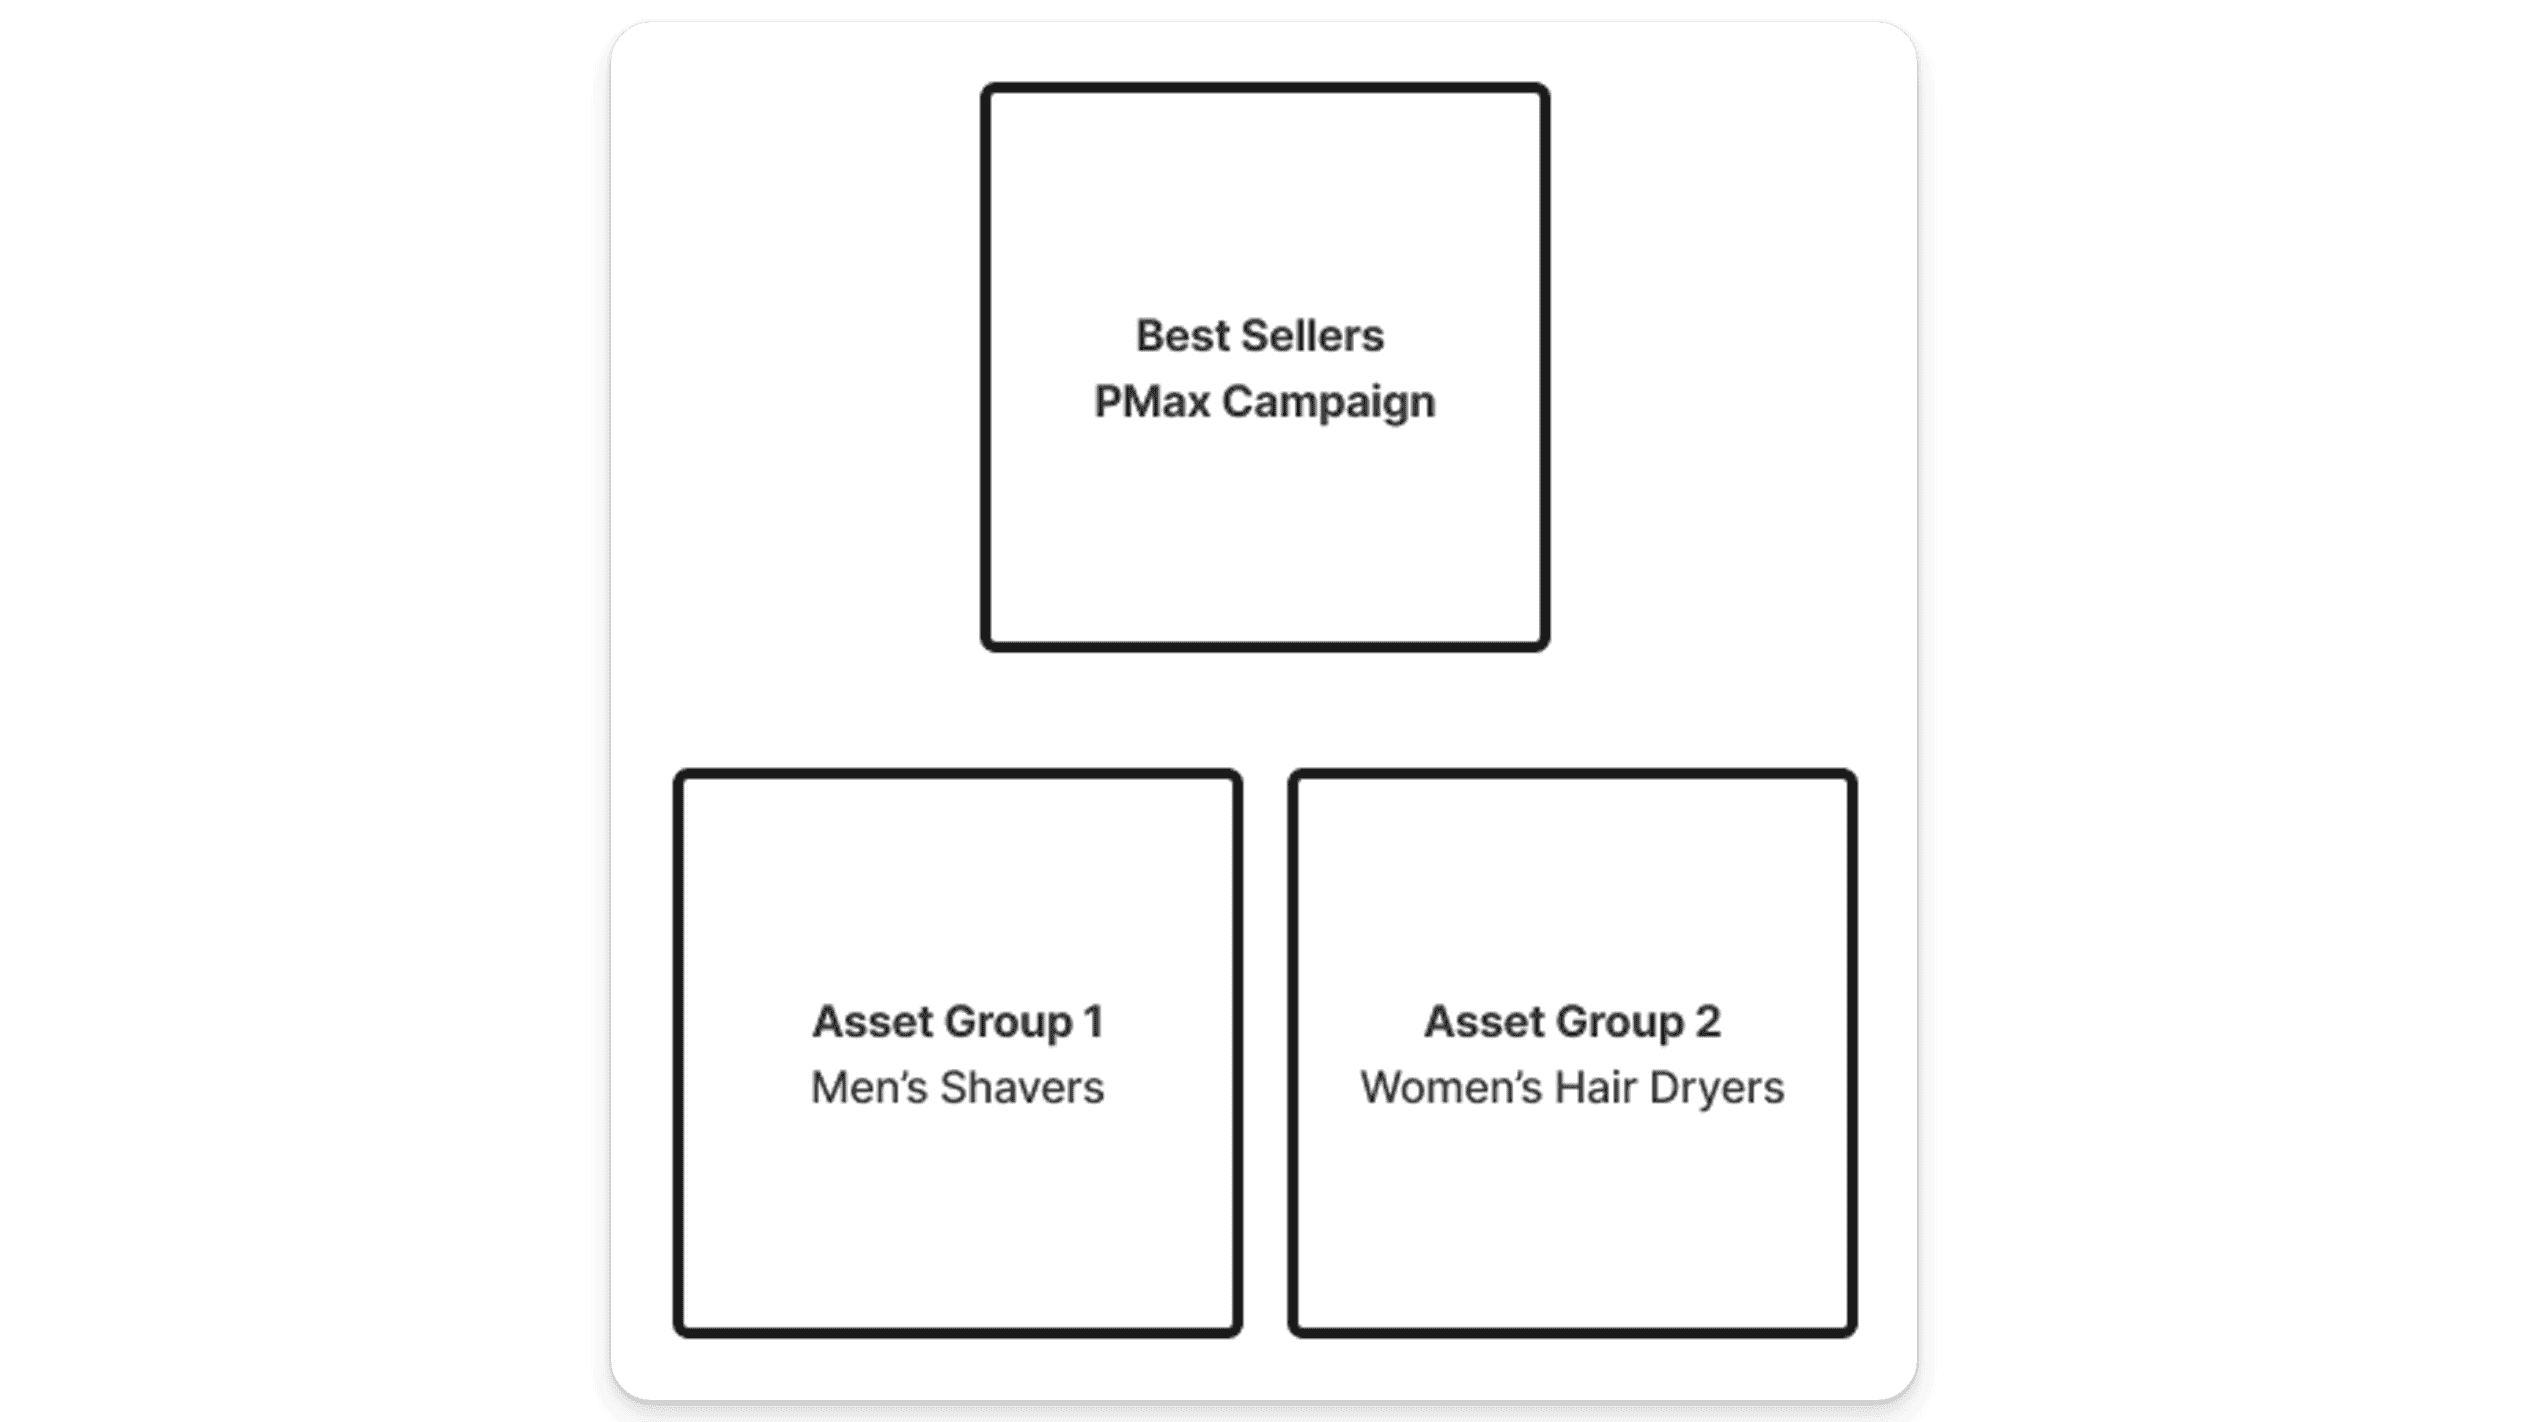 This is a great example of Asset Groups split by product category for a Best Sellers PMax campaign